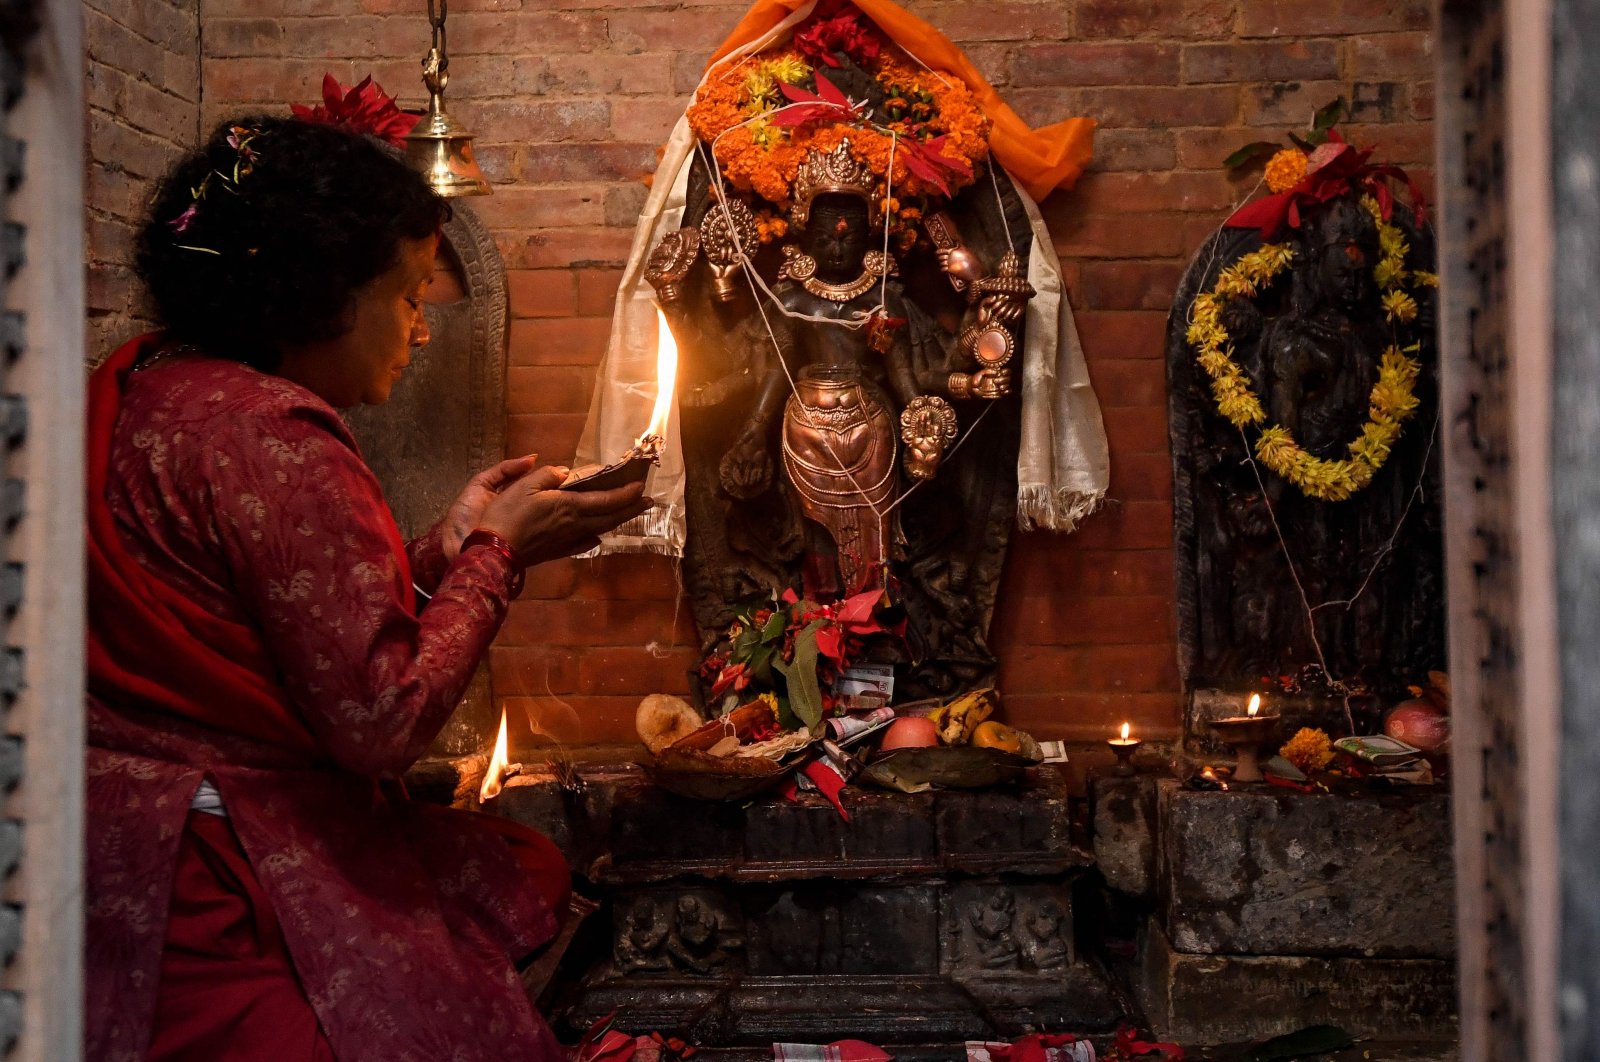 A devotee performs a prayer ritual before a centuries-old sculpture of a Hindu god that was reinstalled nearly 40 years after it was stolen, at its temple in Lalitpur, on the outskirts of Kathmandu, Nepal, Dec. 4, 2021. (AFP Photo)